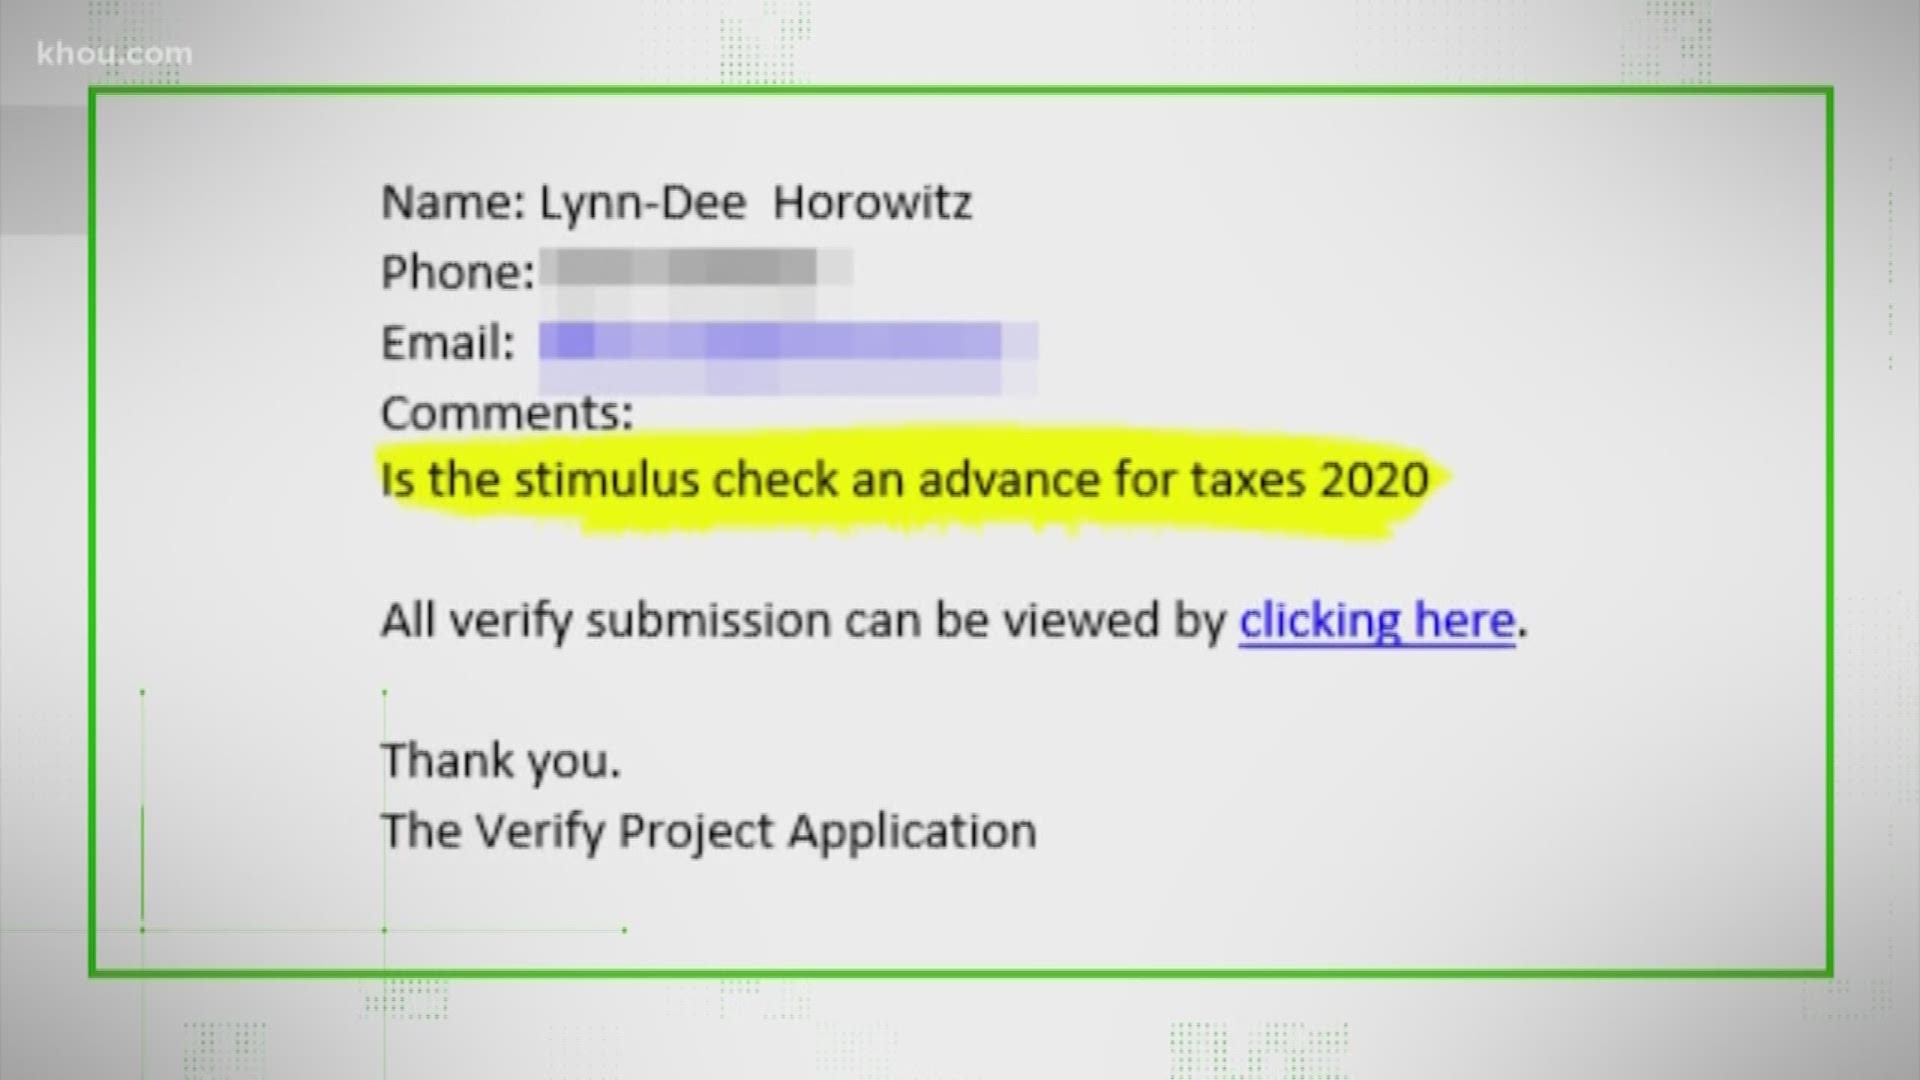 Many of you have questions about the U.S. stimulus checks such as will it be taxed, will it come out of your 2020 return and more.